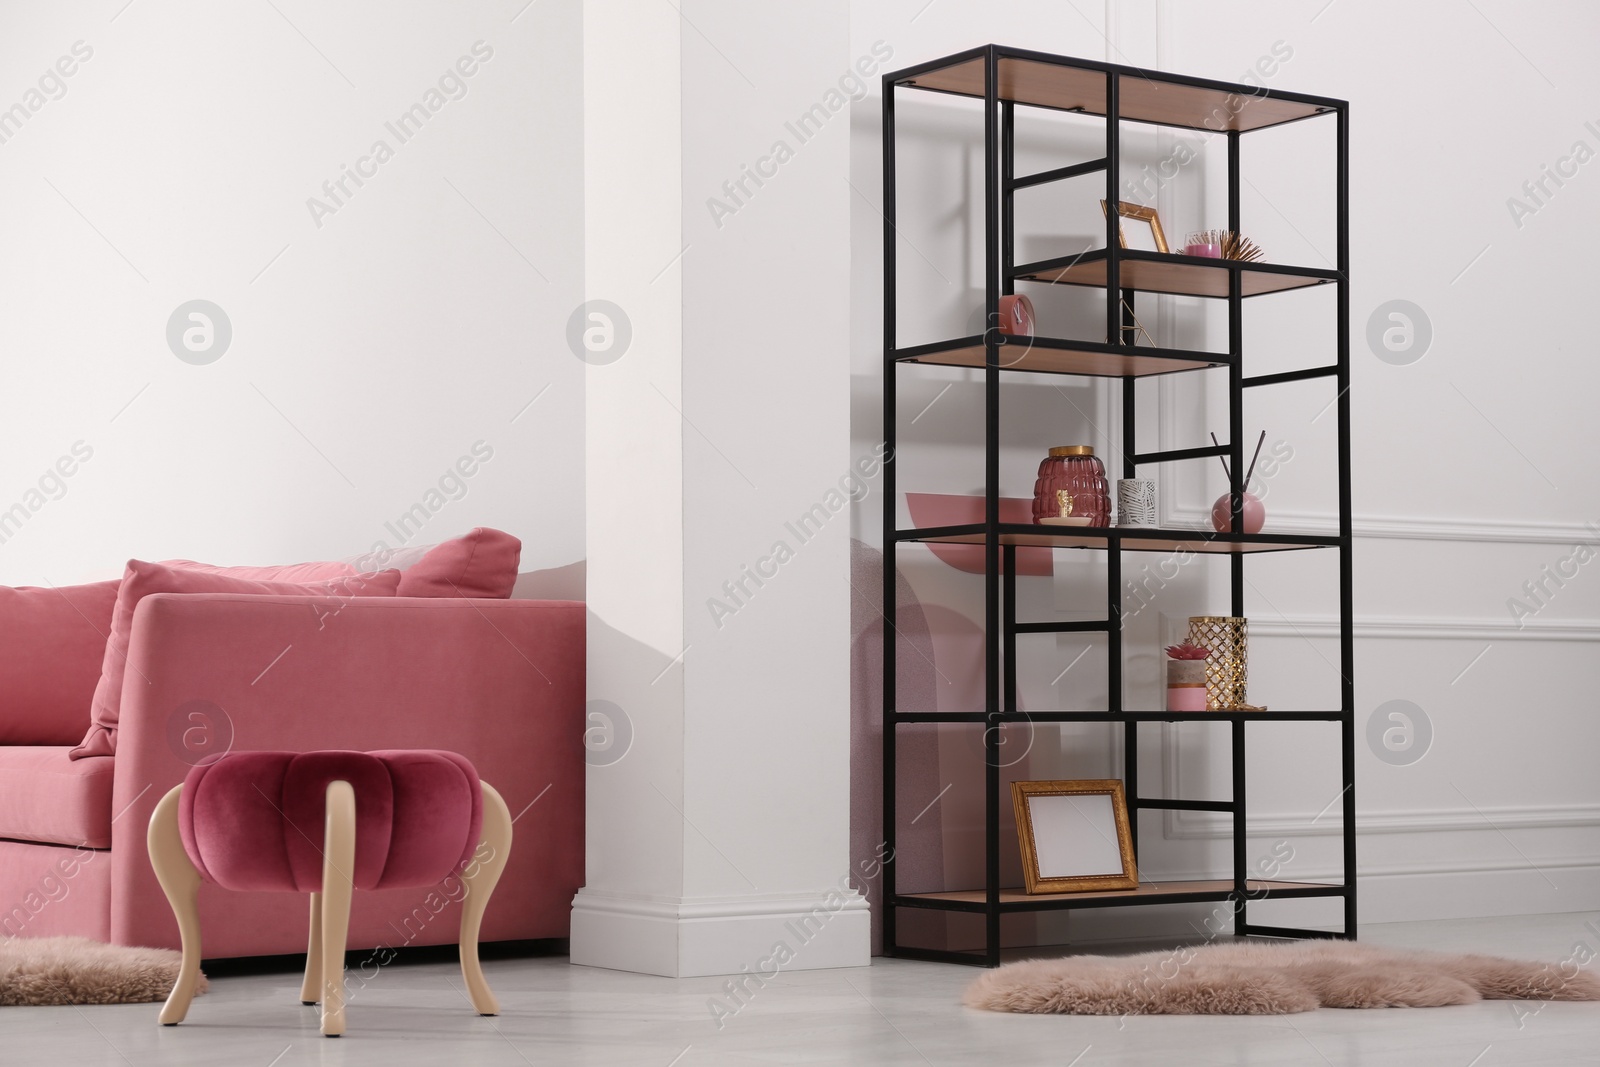 Photo of Stylish living room interior with comfortable furniture and shelving unit. Modern design